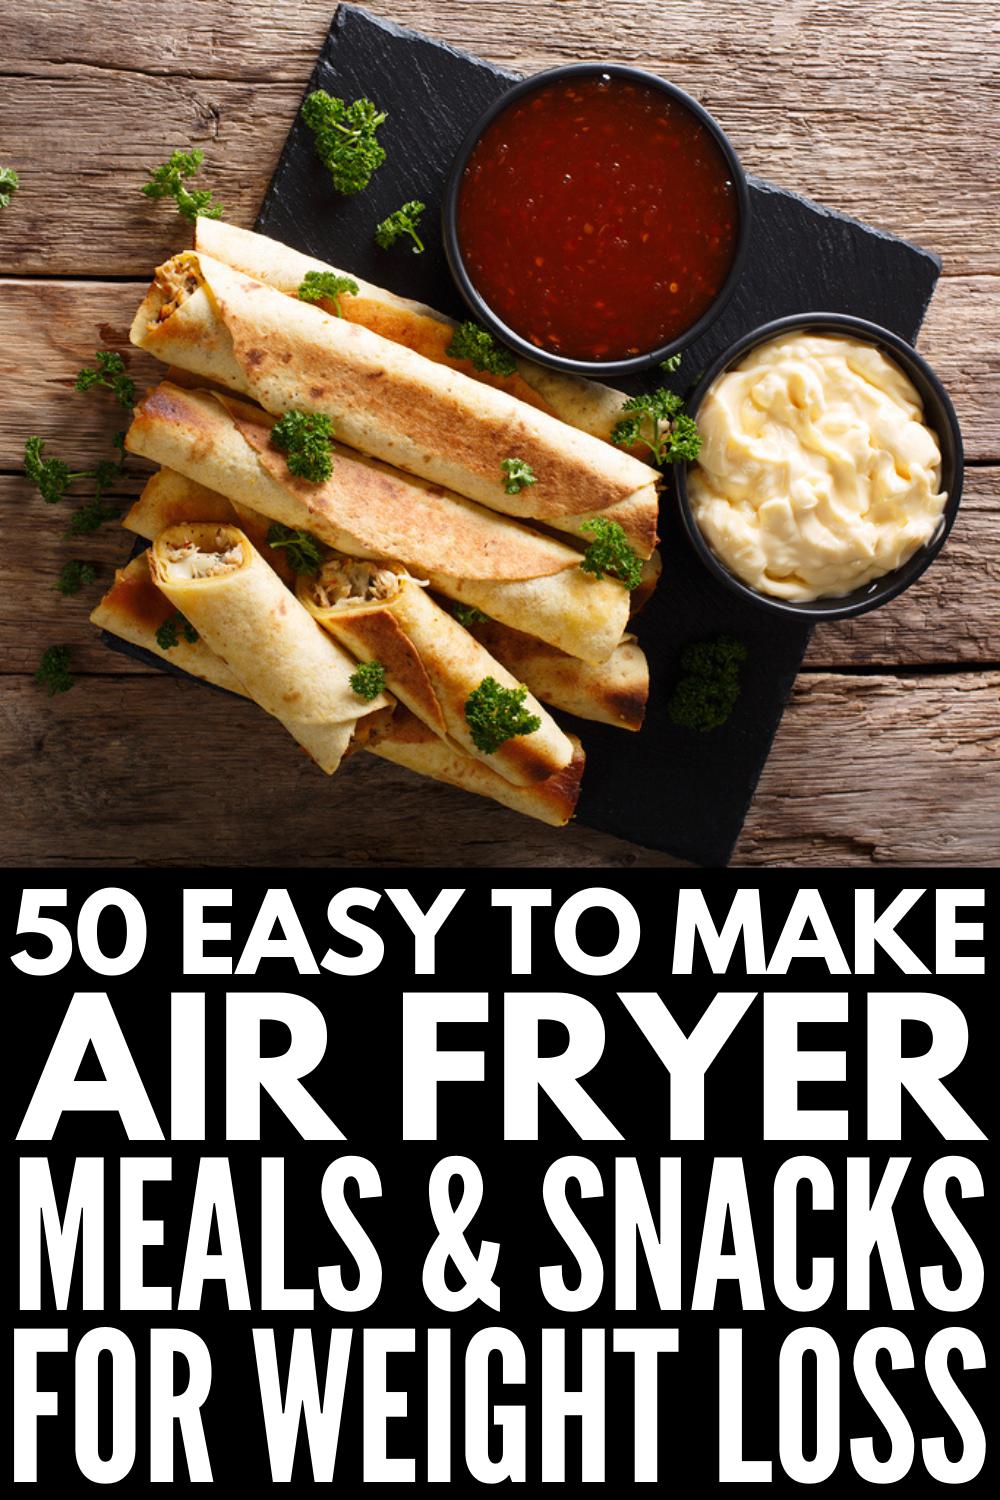 Indulge Without Guilt: 50 Healthy Air Fryer Recipes to Try 